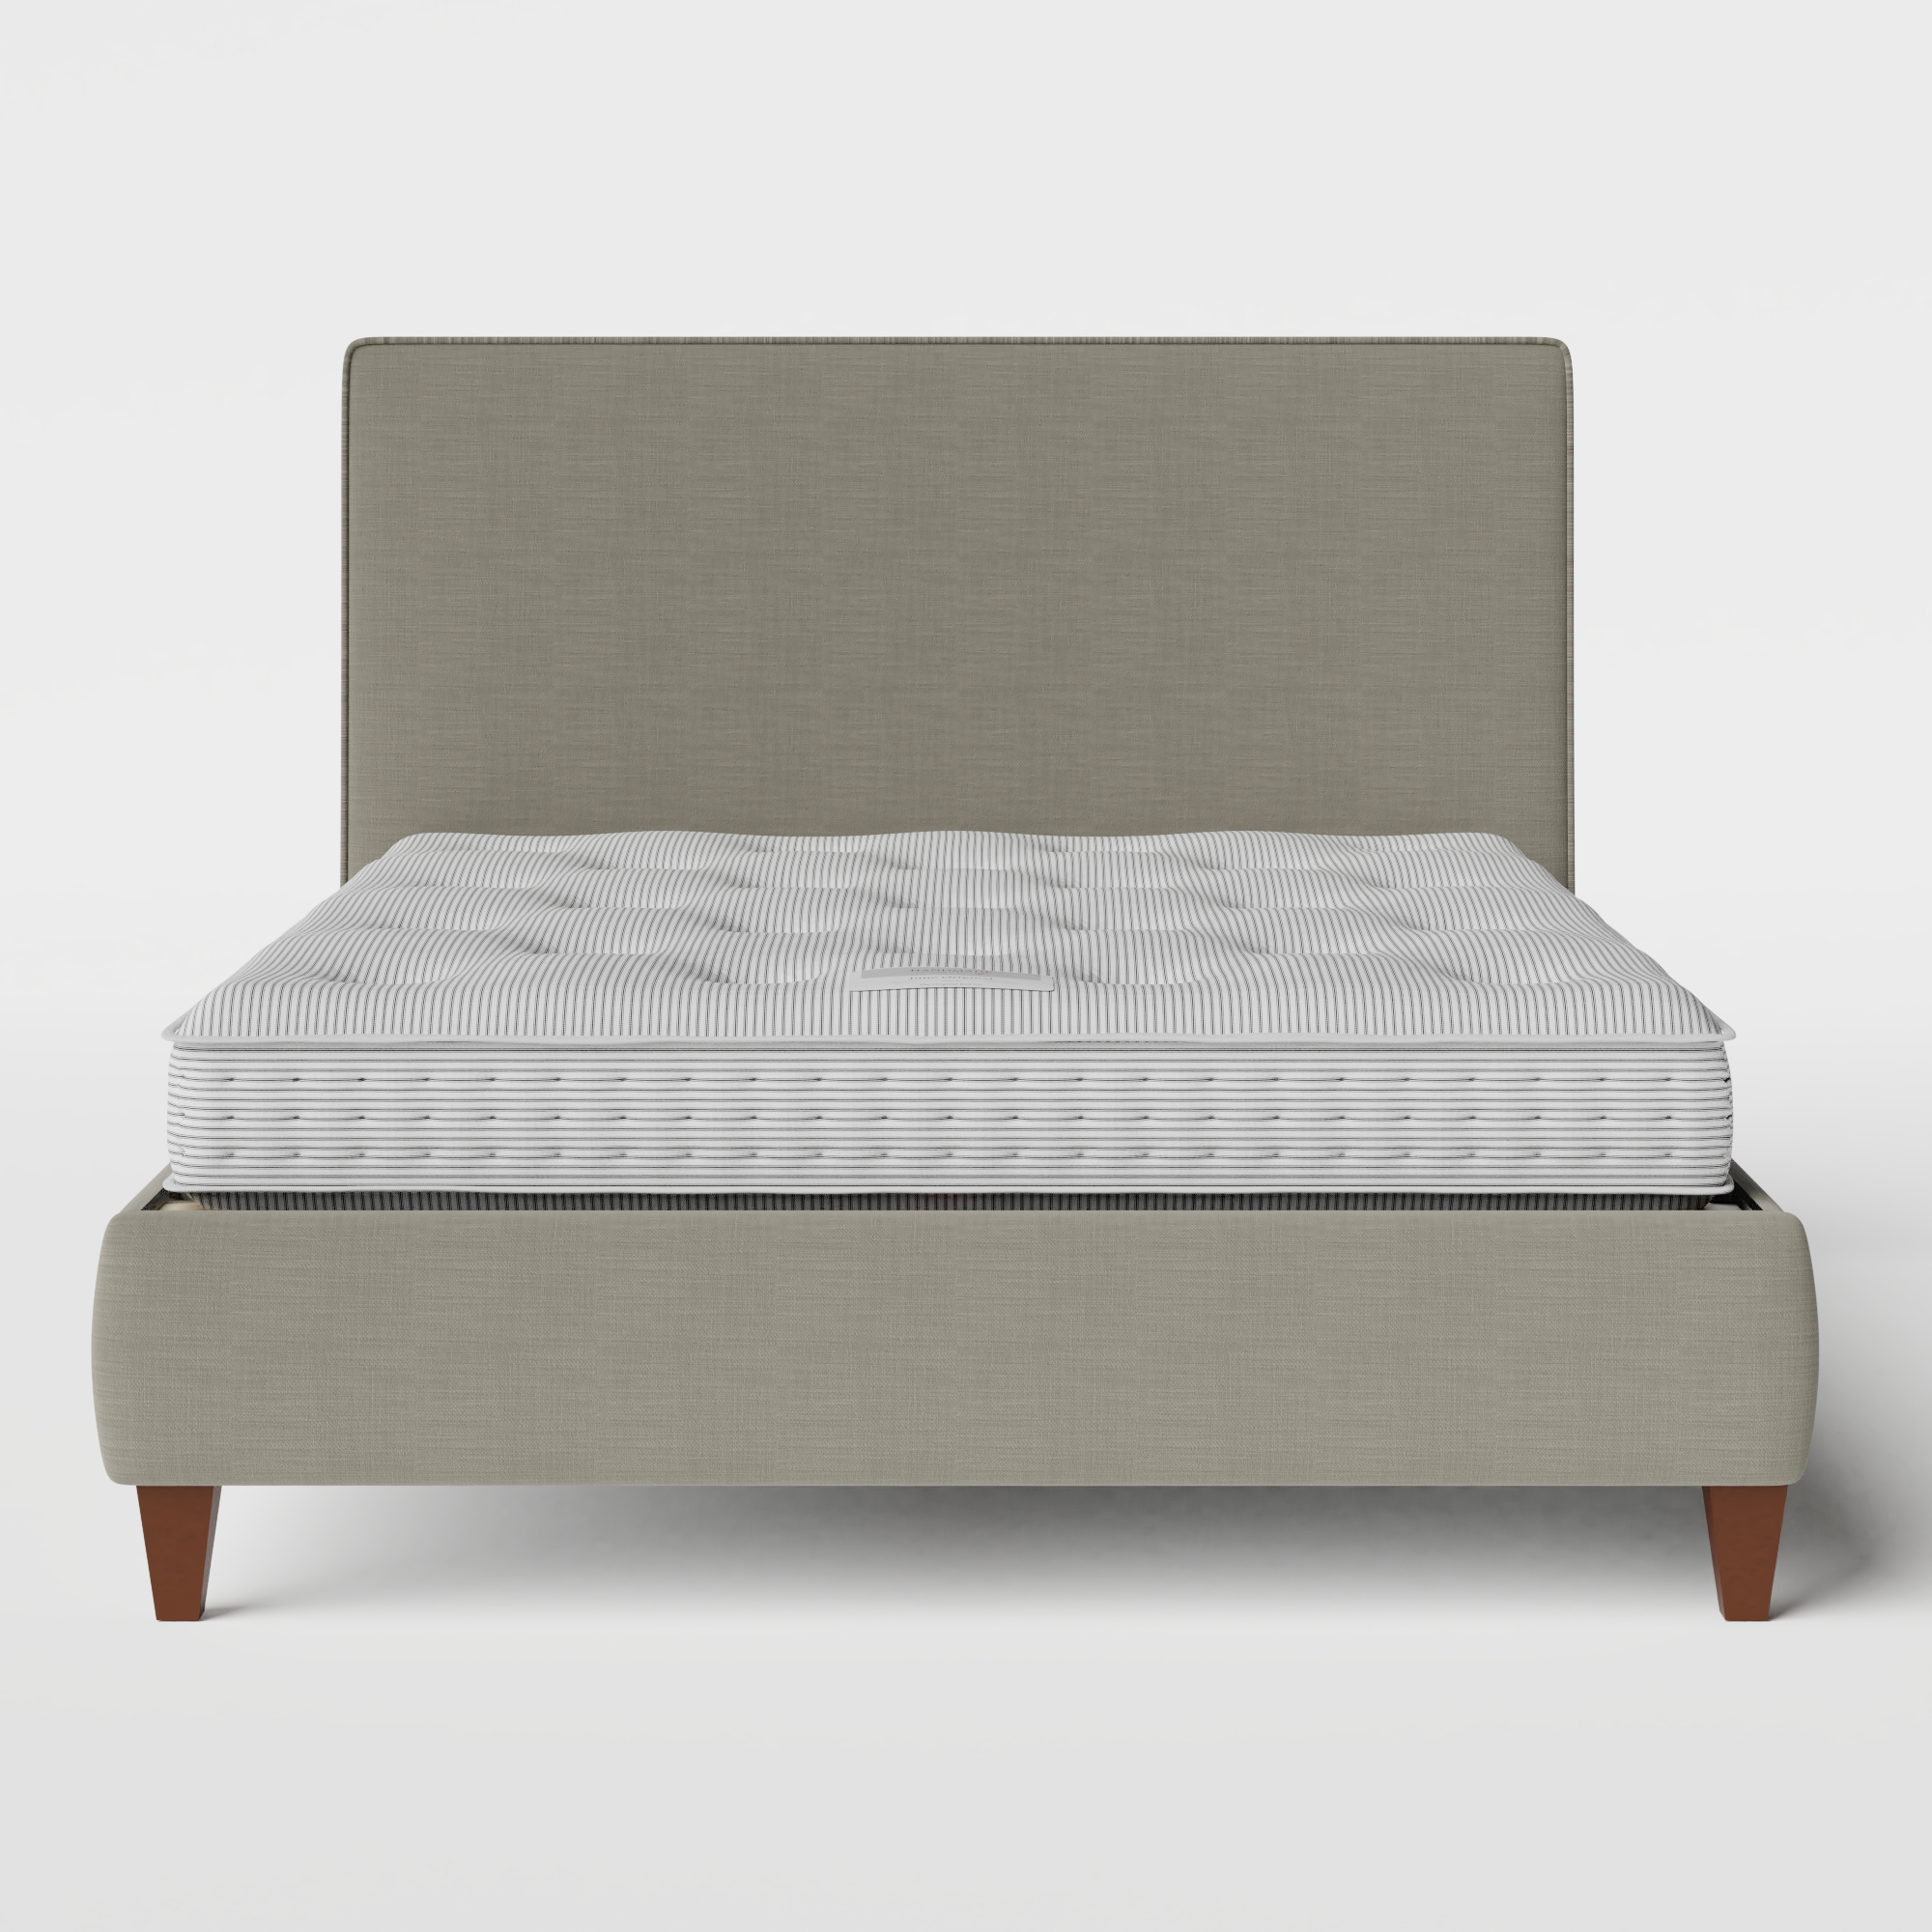 Yushan with Piping upholstered bed in grey fabric with Juno mattress